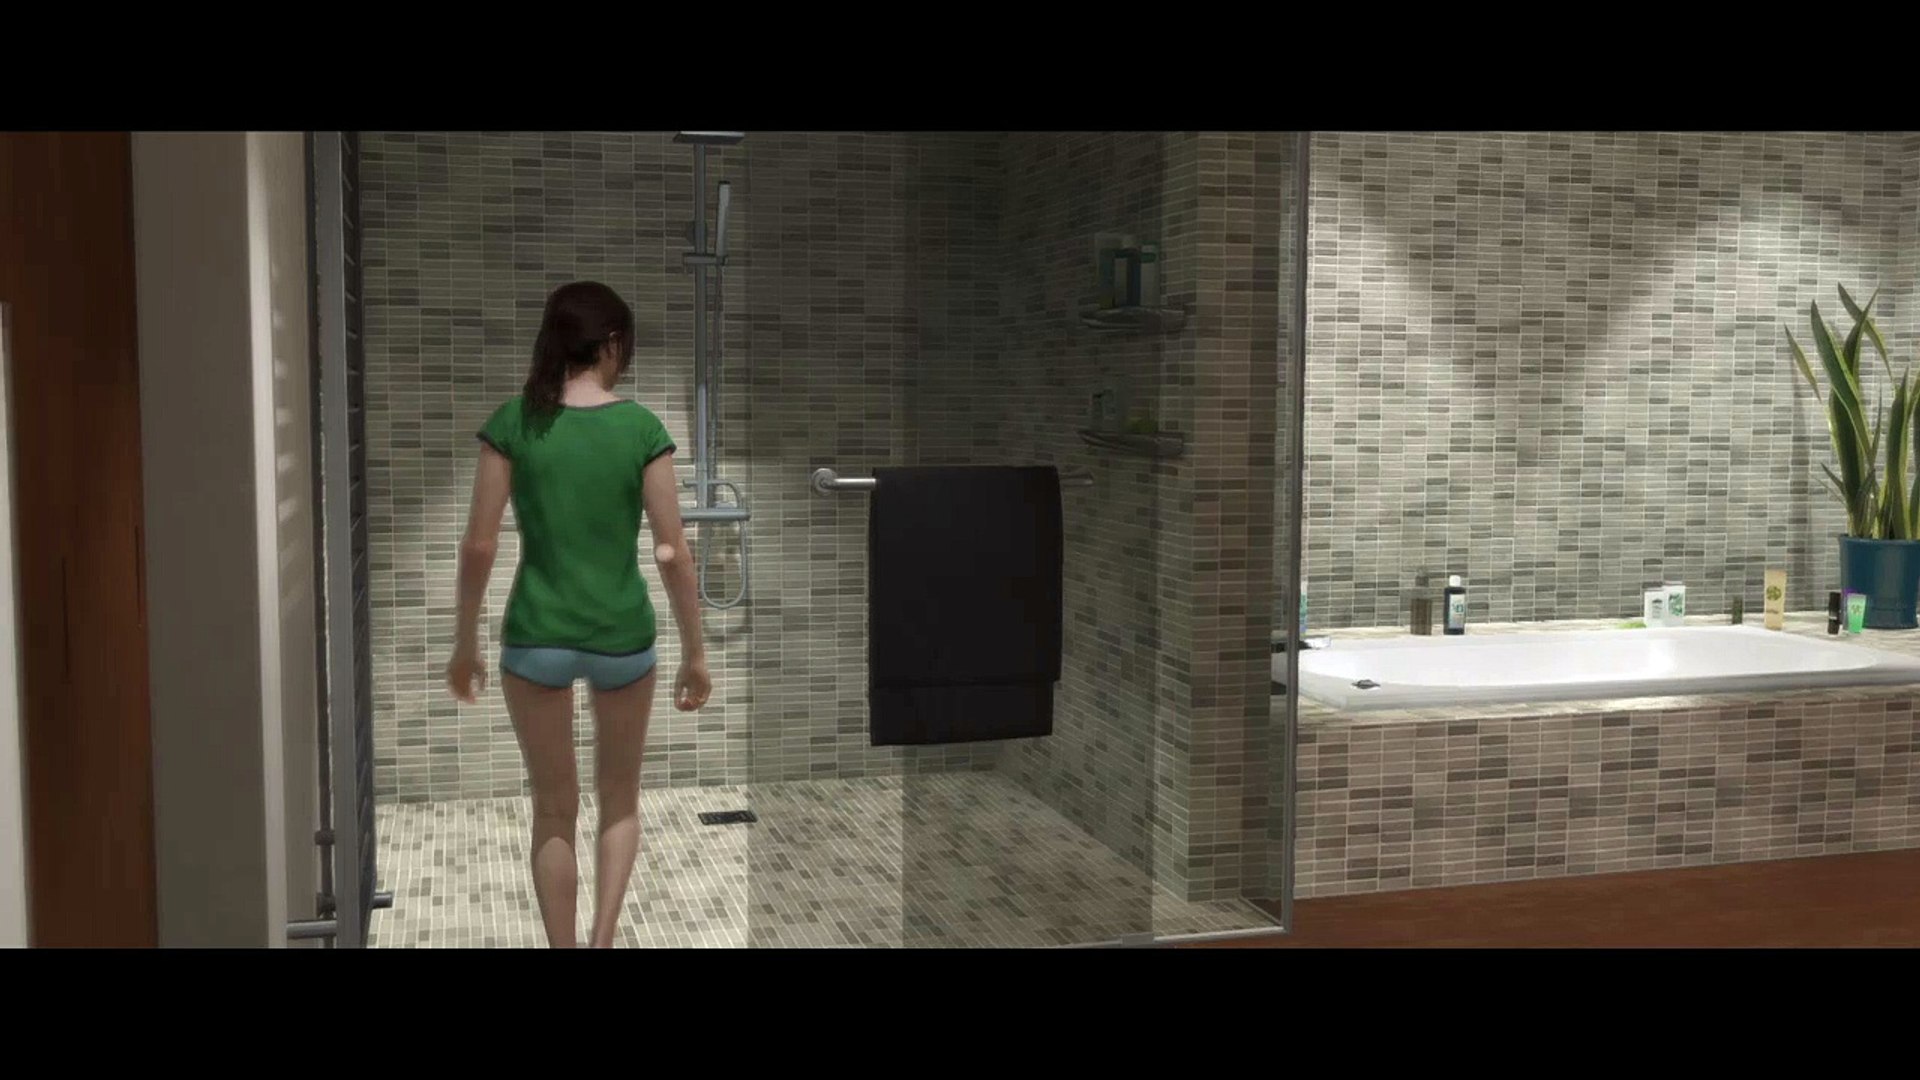 brent merlo add photo beyond two souls shower